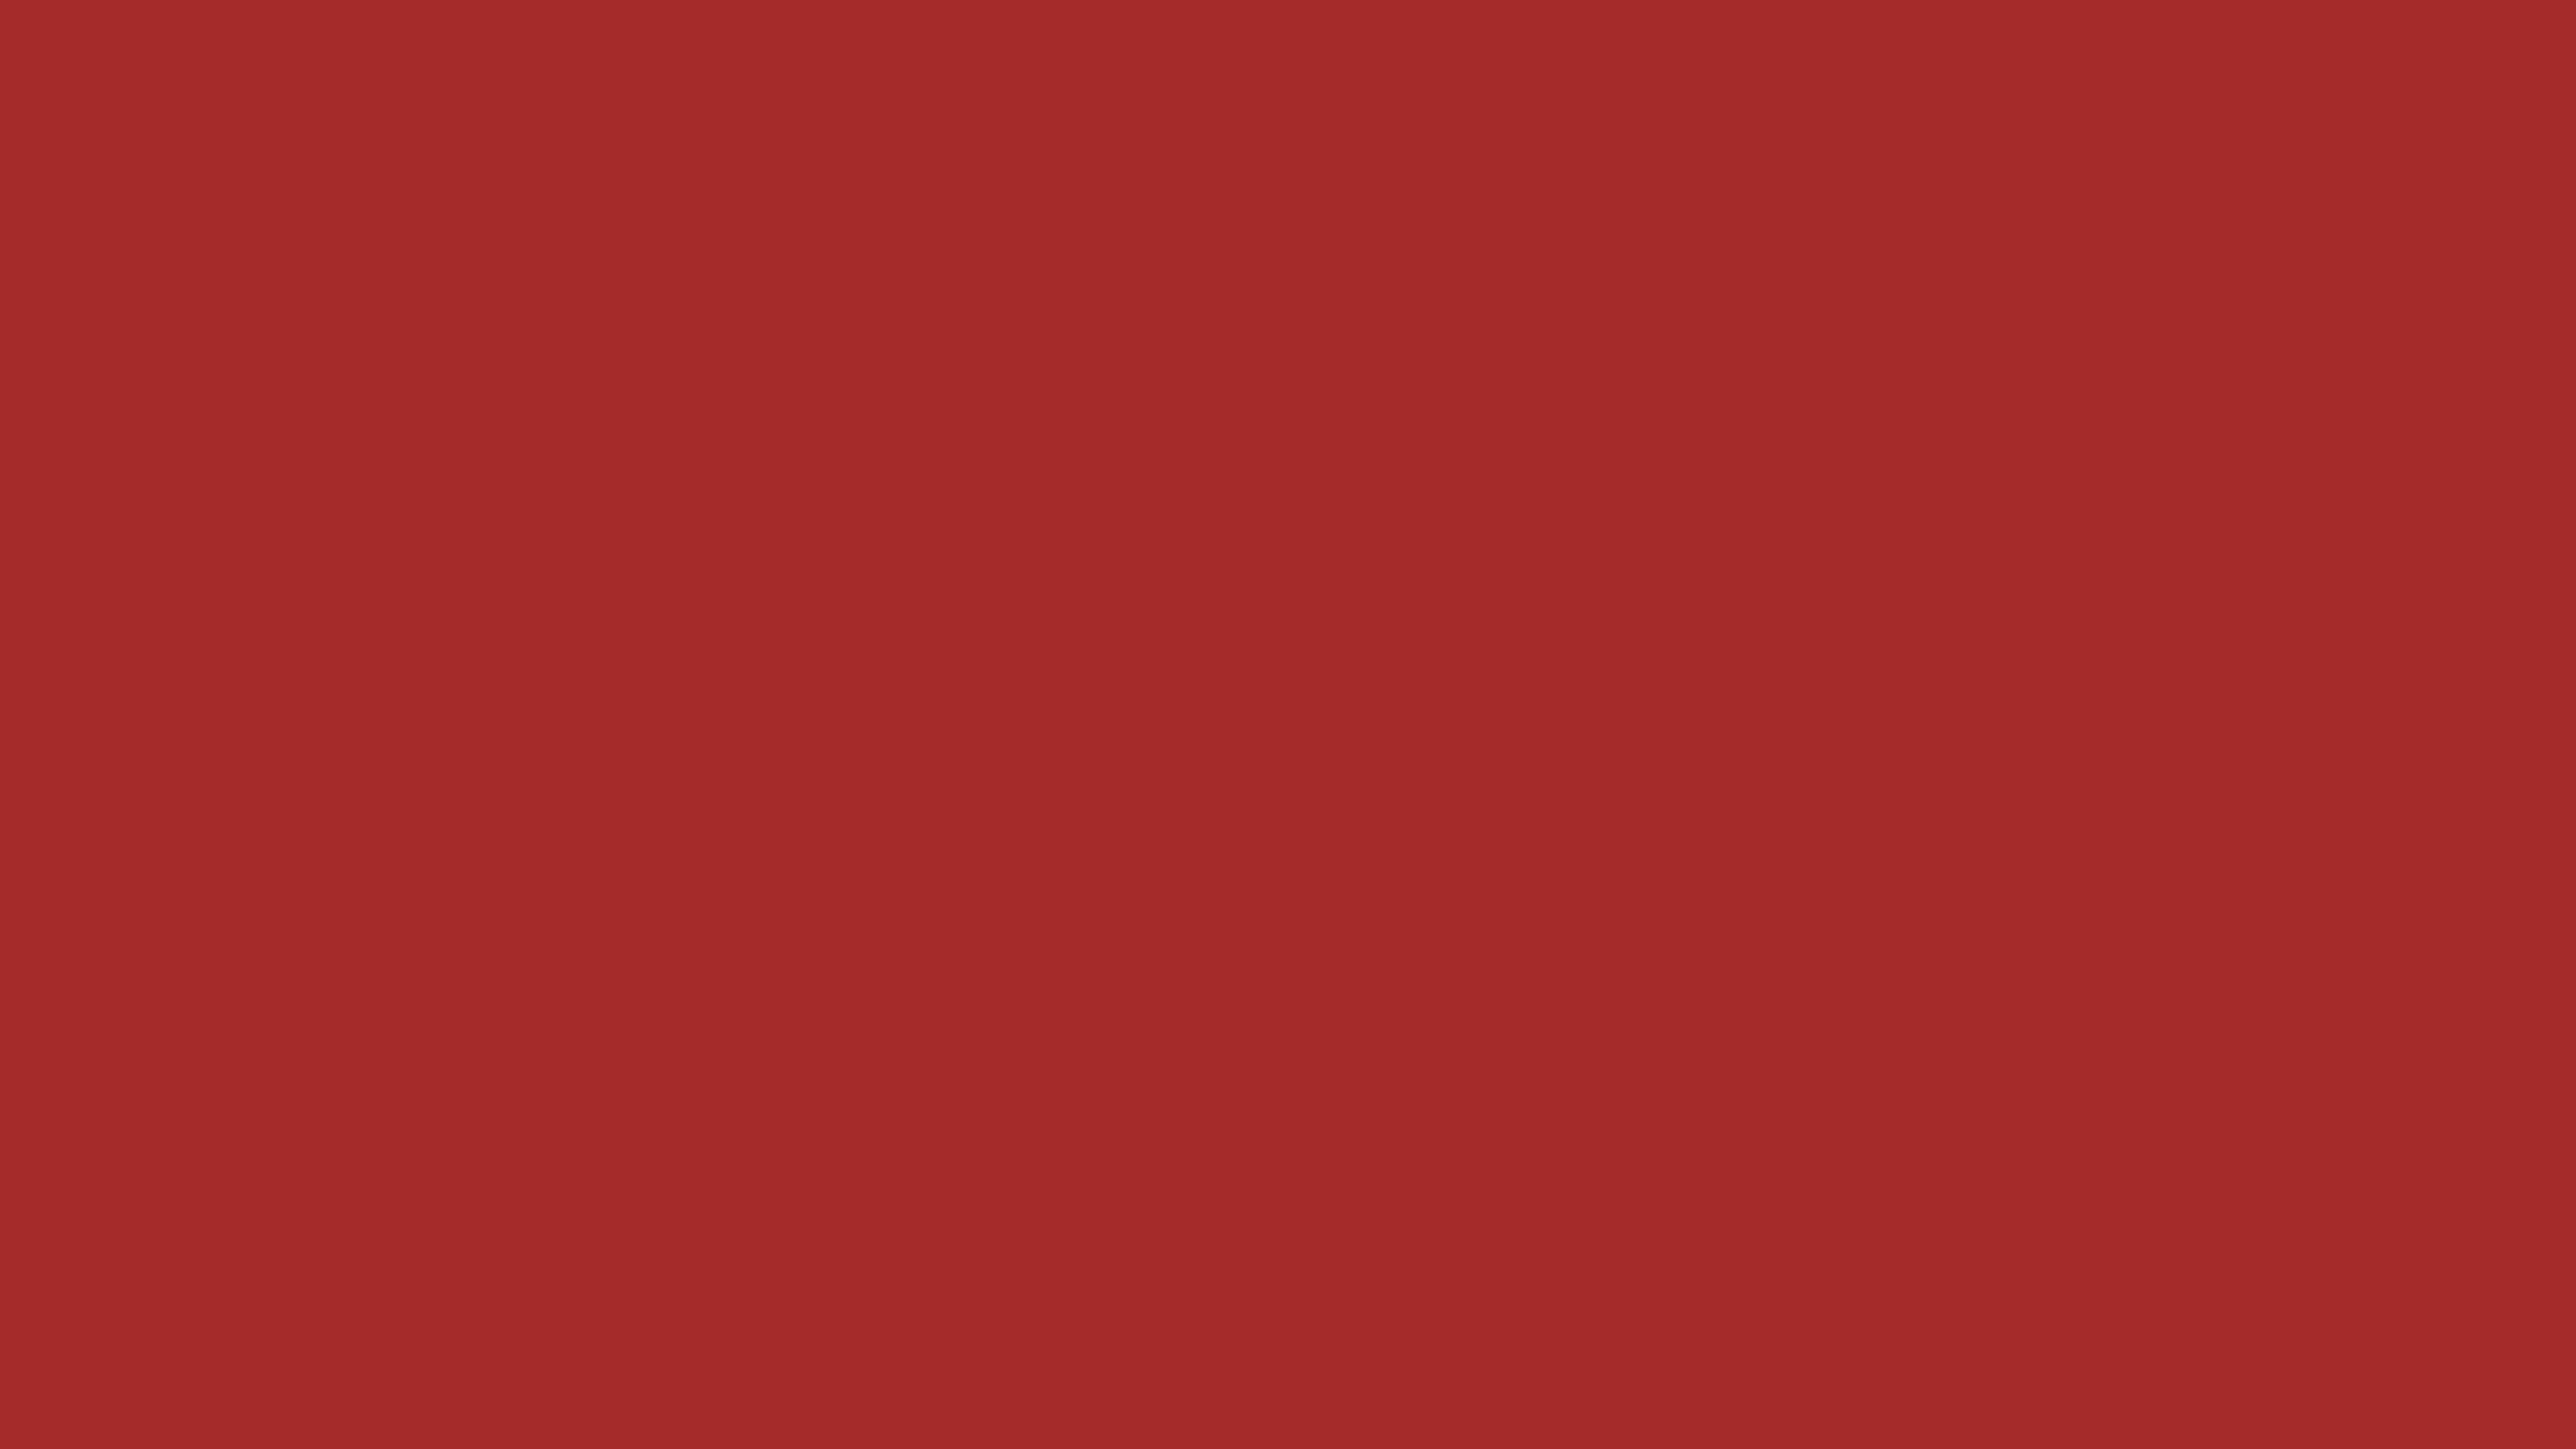 4096x2304 Red-brown Solid Color Background